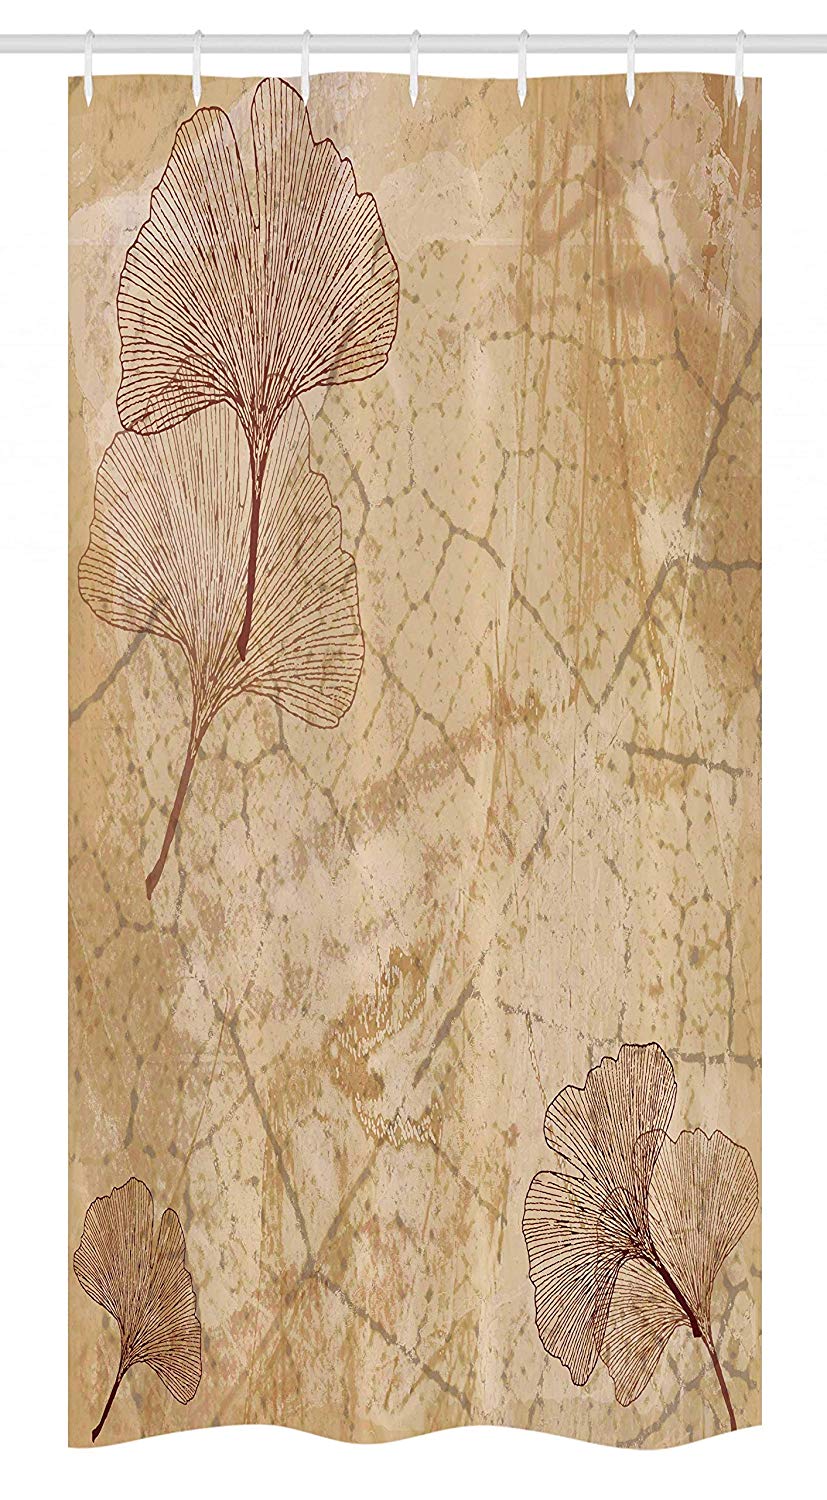 Ambesonne Beige Stall Shower Curtain, Small Large Ginkgo Leaves Pattern Dramatic Dated Fossil Maidenhair Tree Nature Art, Fabric Bathroom Decor Set with Hooks, 36